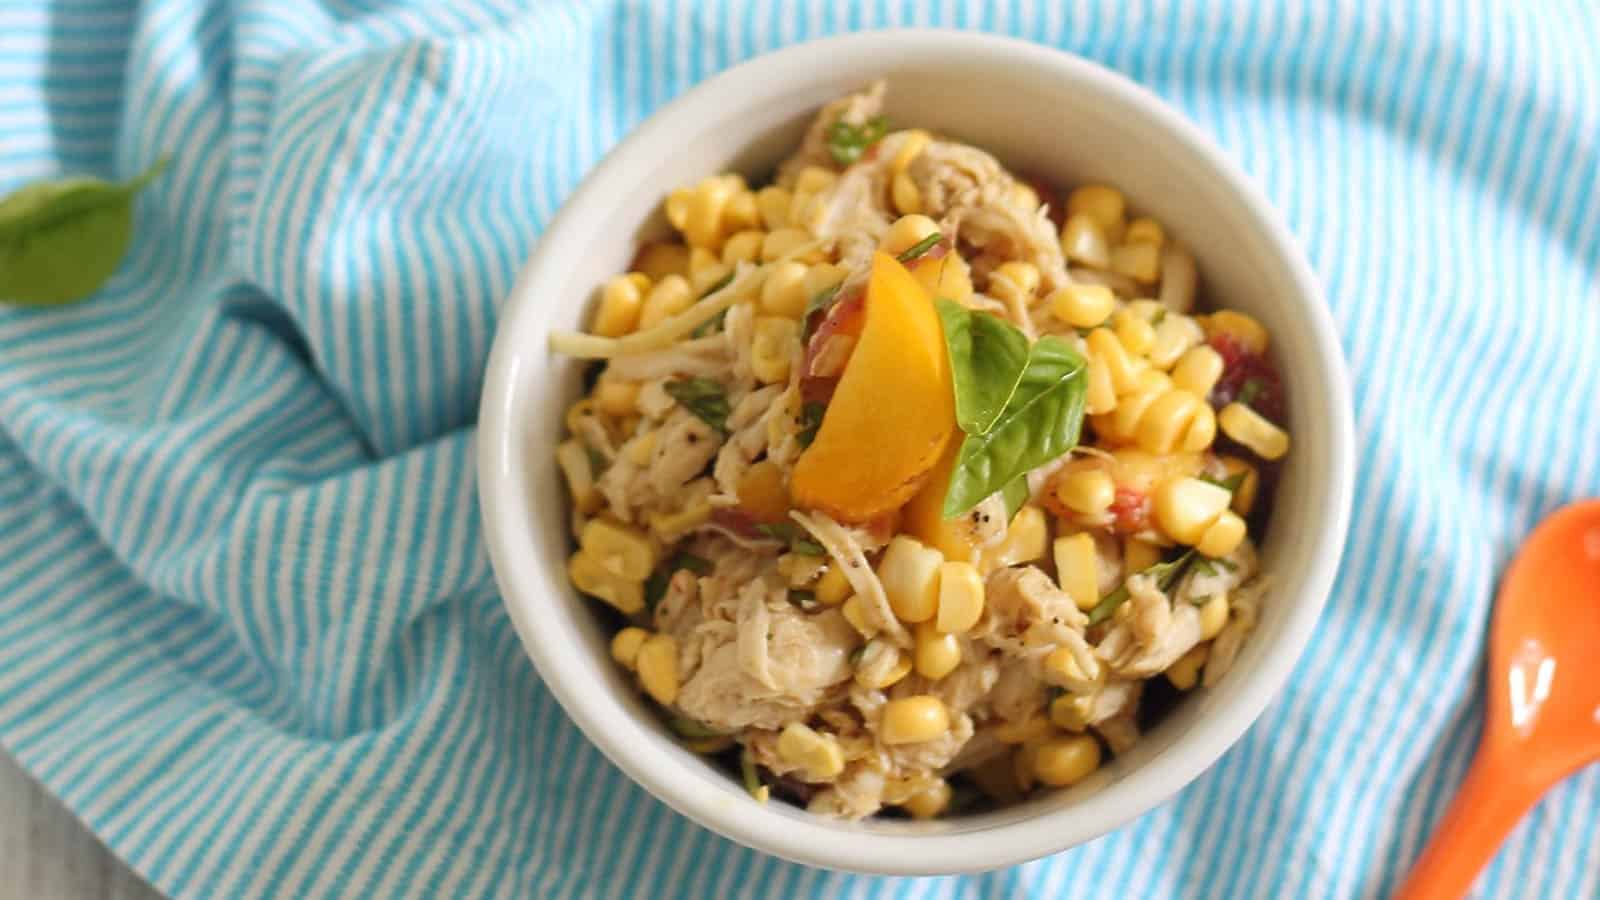 Sweet corn peach chicken salad with honey mustard dressing in a small white bowl with orange spoon and basil garnish.